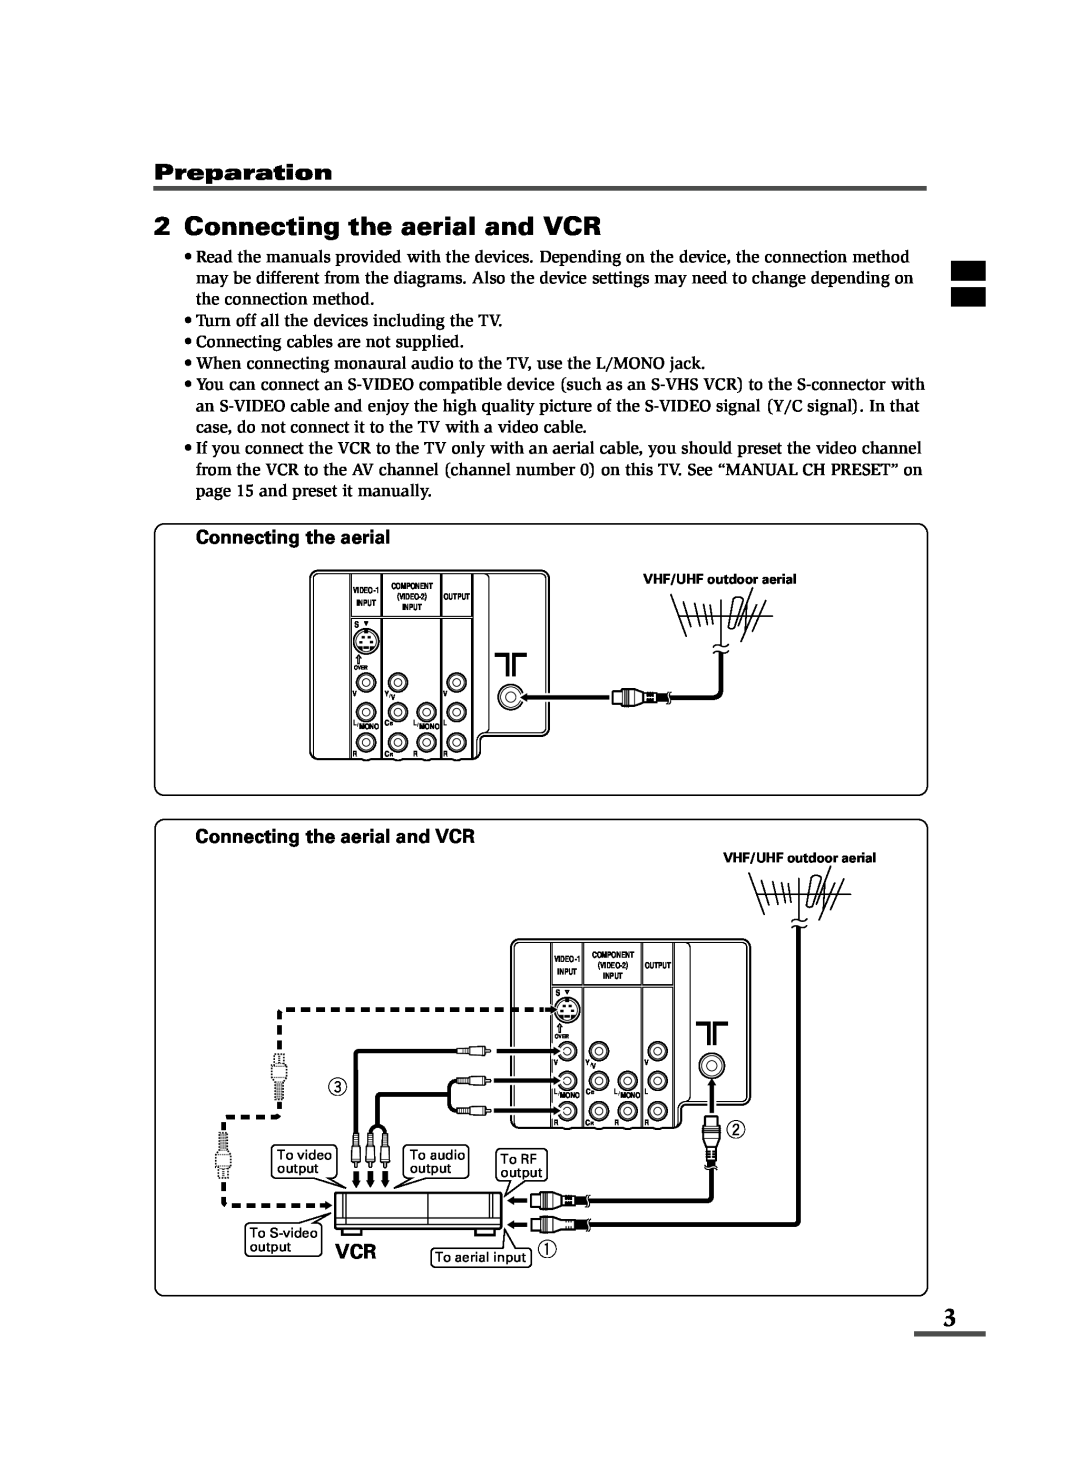 JVC specifications Connecting the aerial and VCR, Preparation 